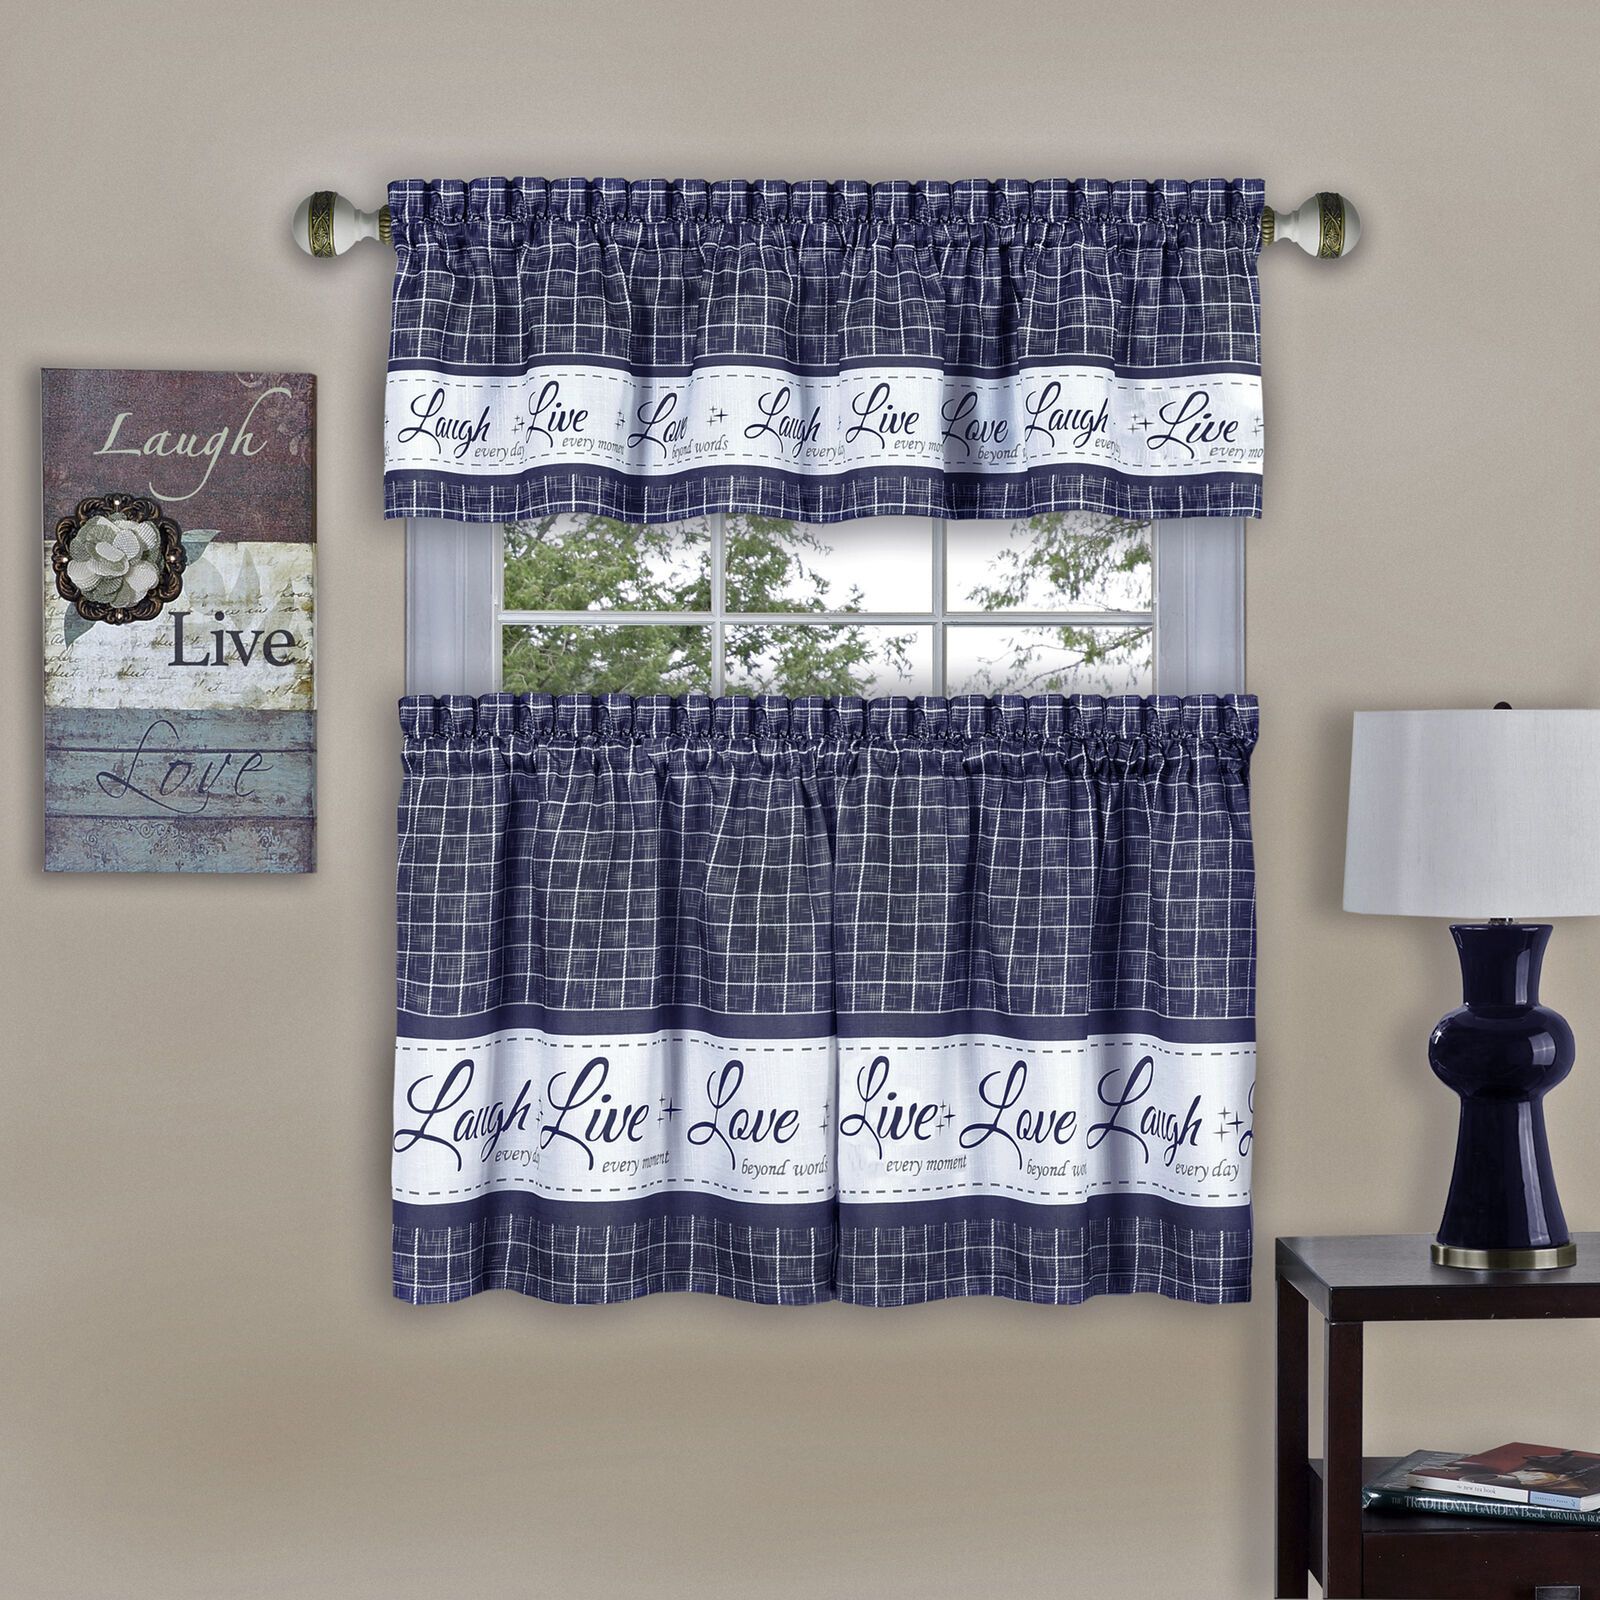 Country Gingham Check Live Laugh Love 3 Piece Café Plaid Intended For Lodge Plaid 3 Piece Kitchen Curtain Tier And Valance Sets (View 13 of 20)